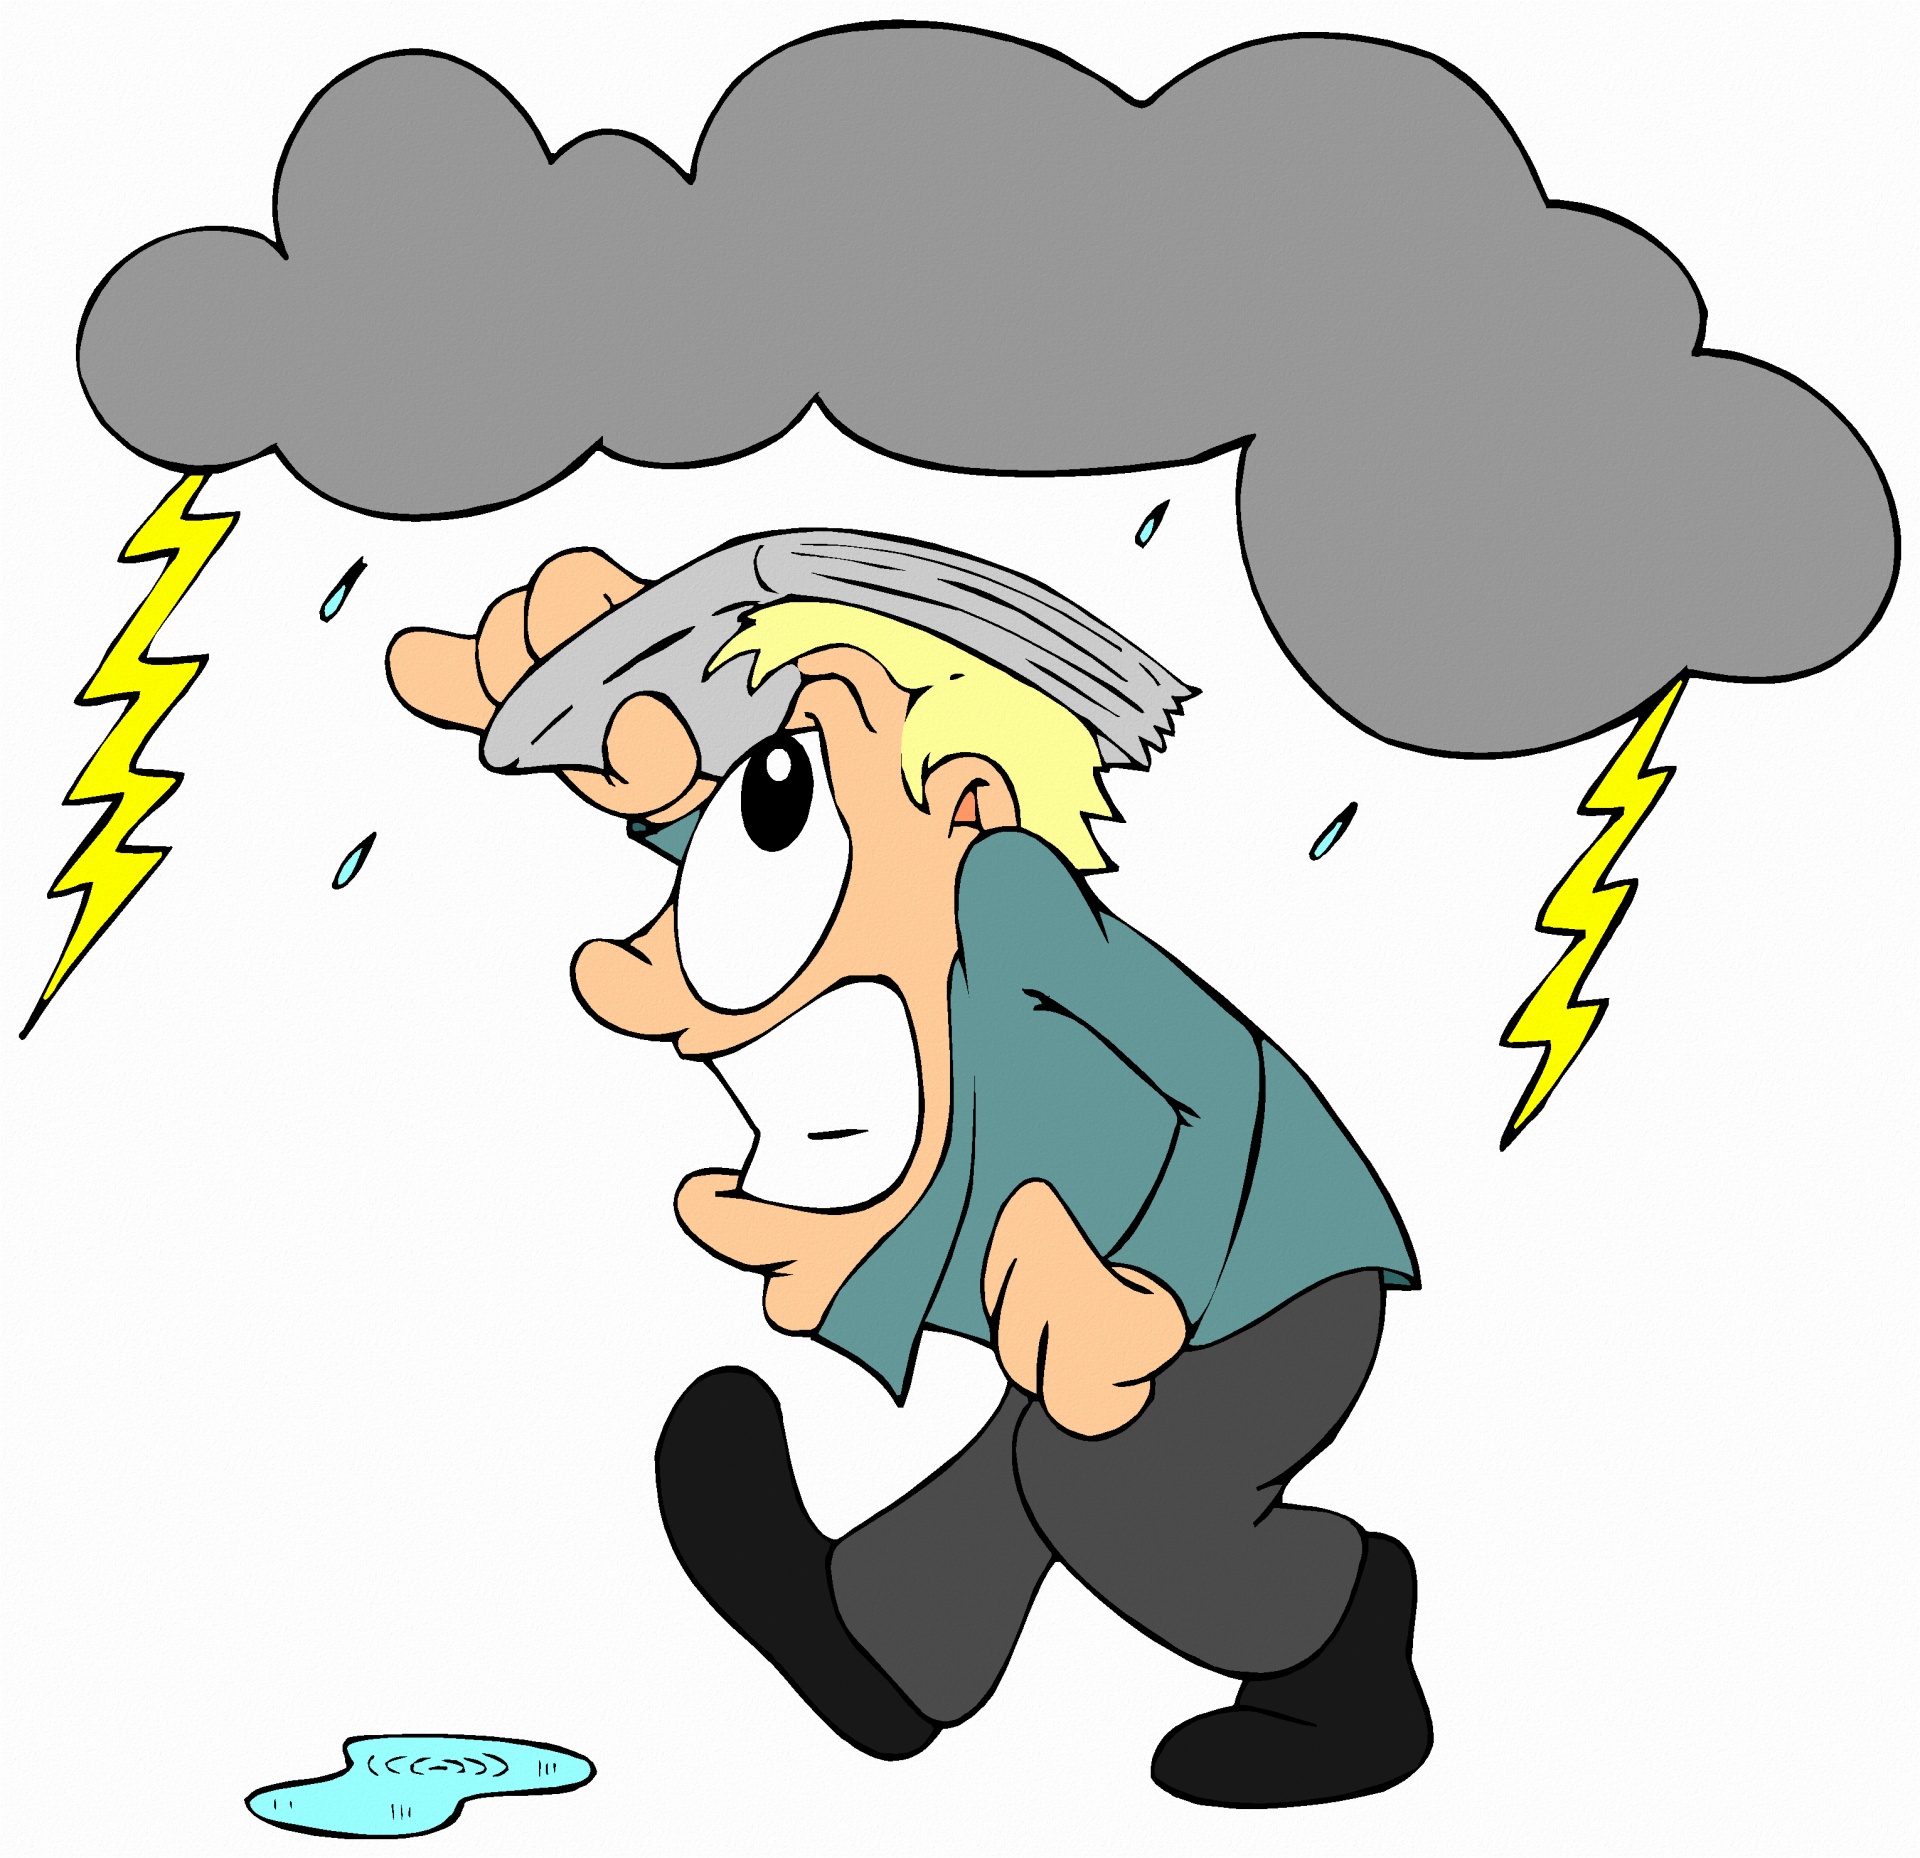 Found. clipart images for 'Storm'. 